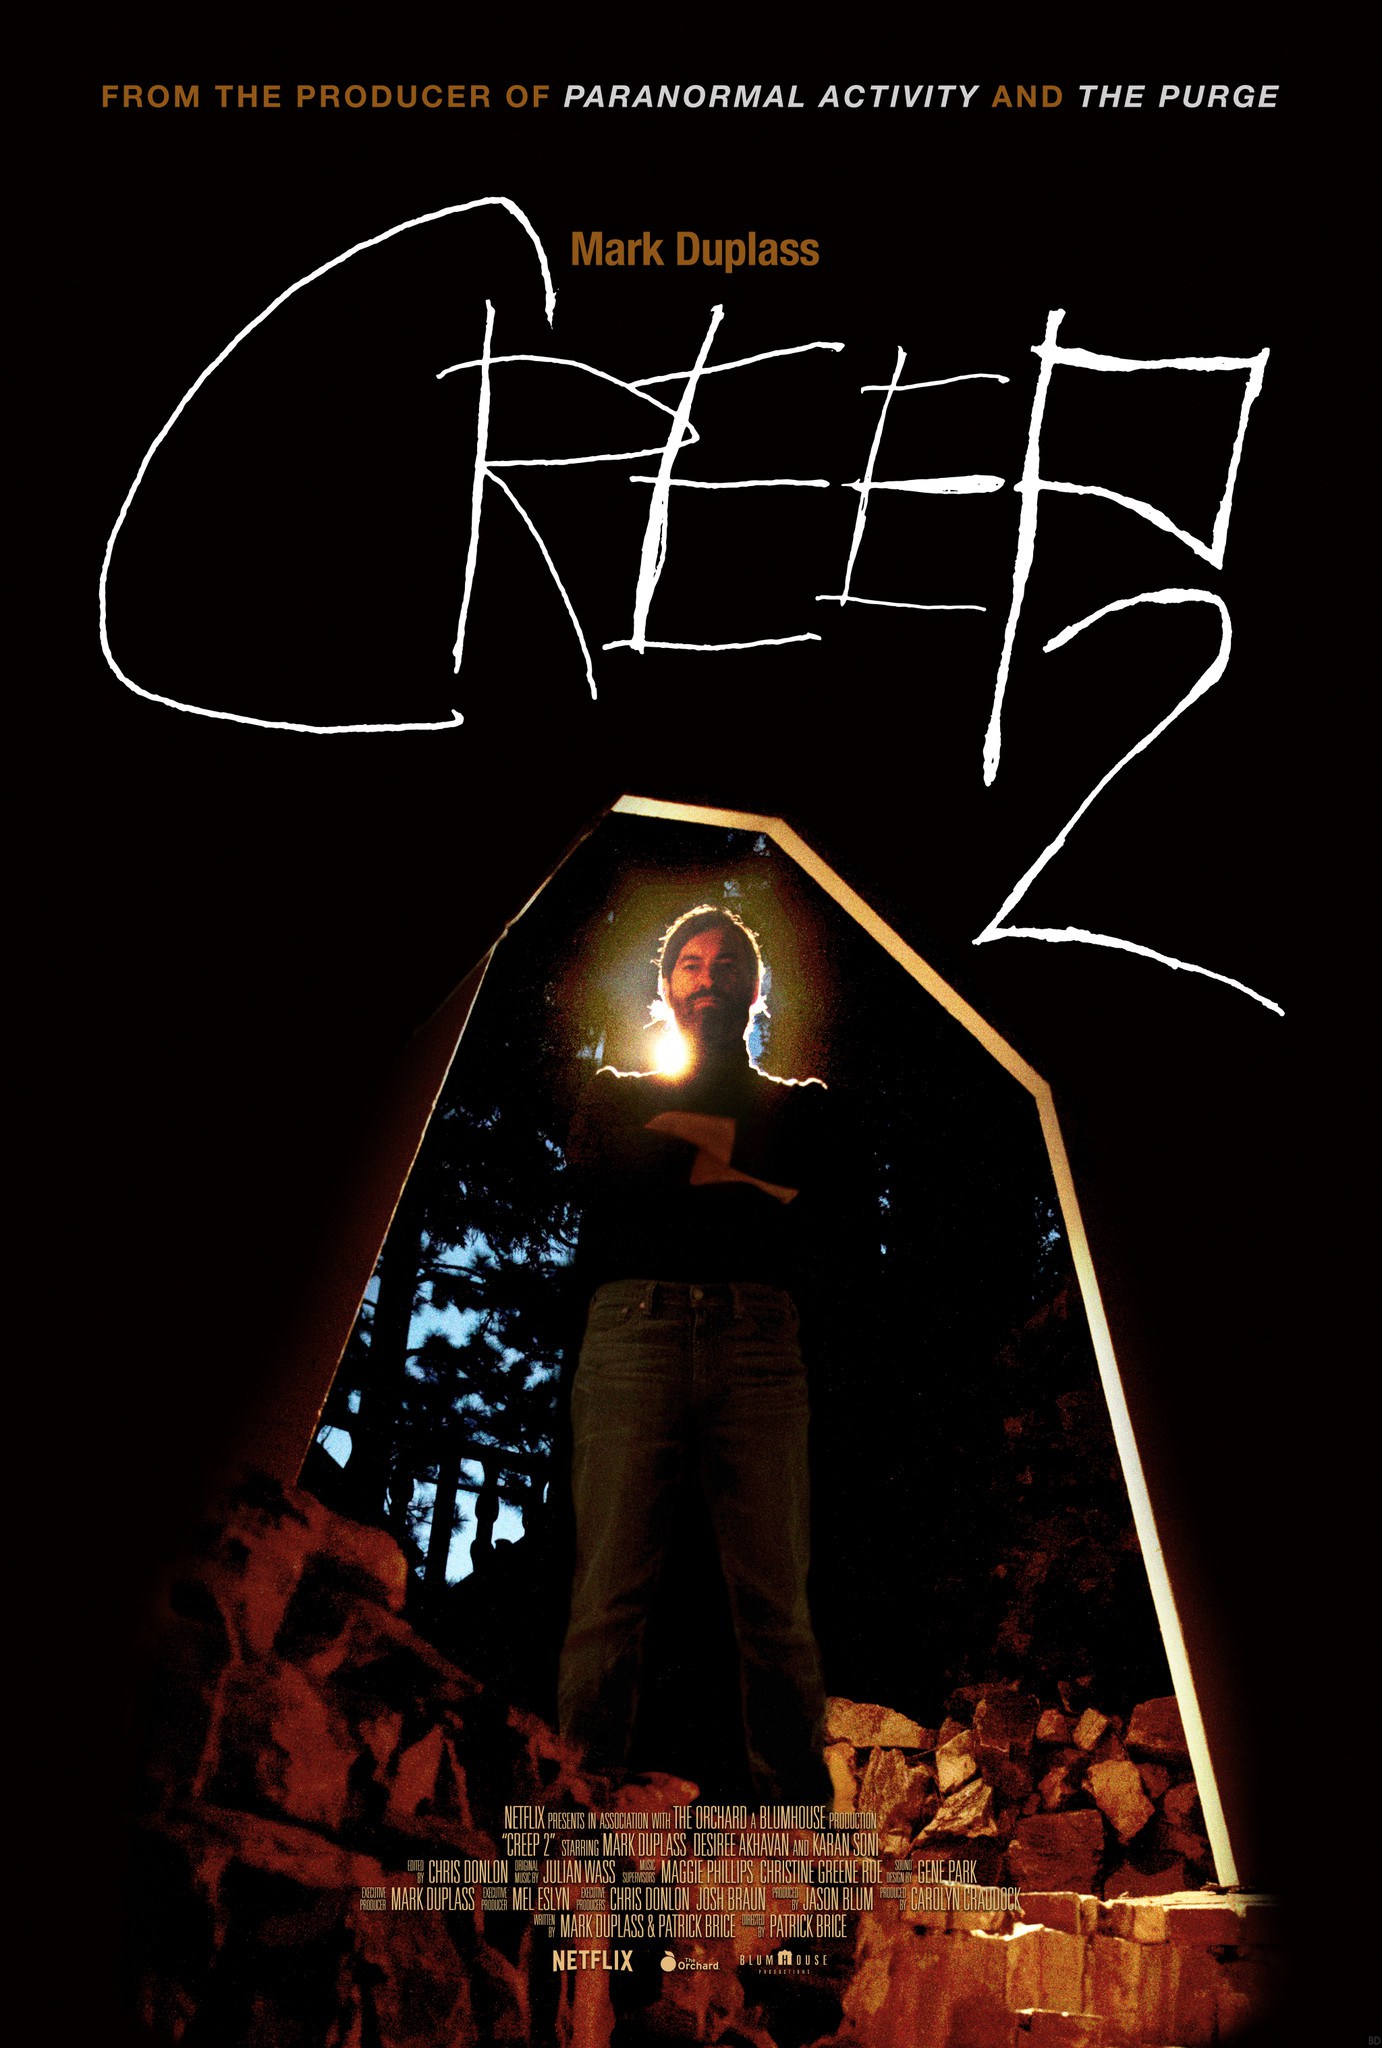 Creep 2 film review: Mark Duplass’ sinister weirdo is back for more